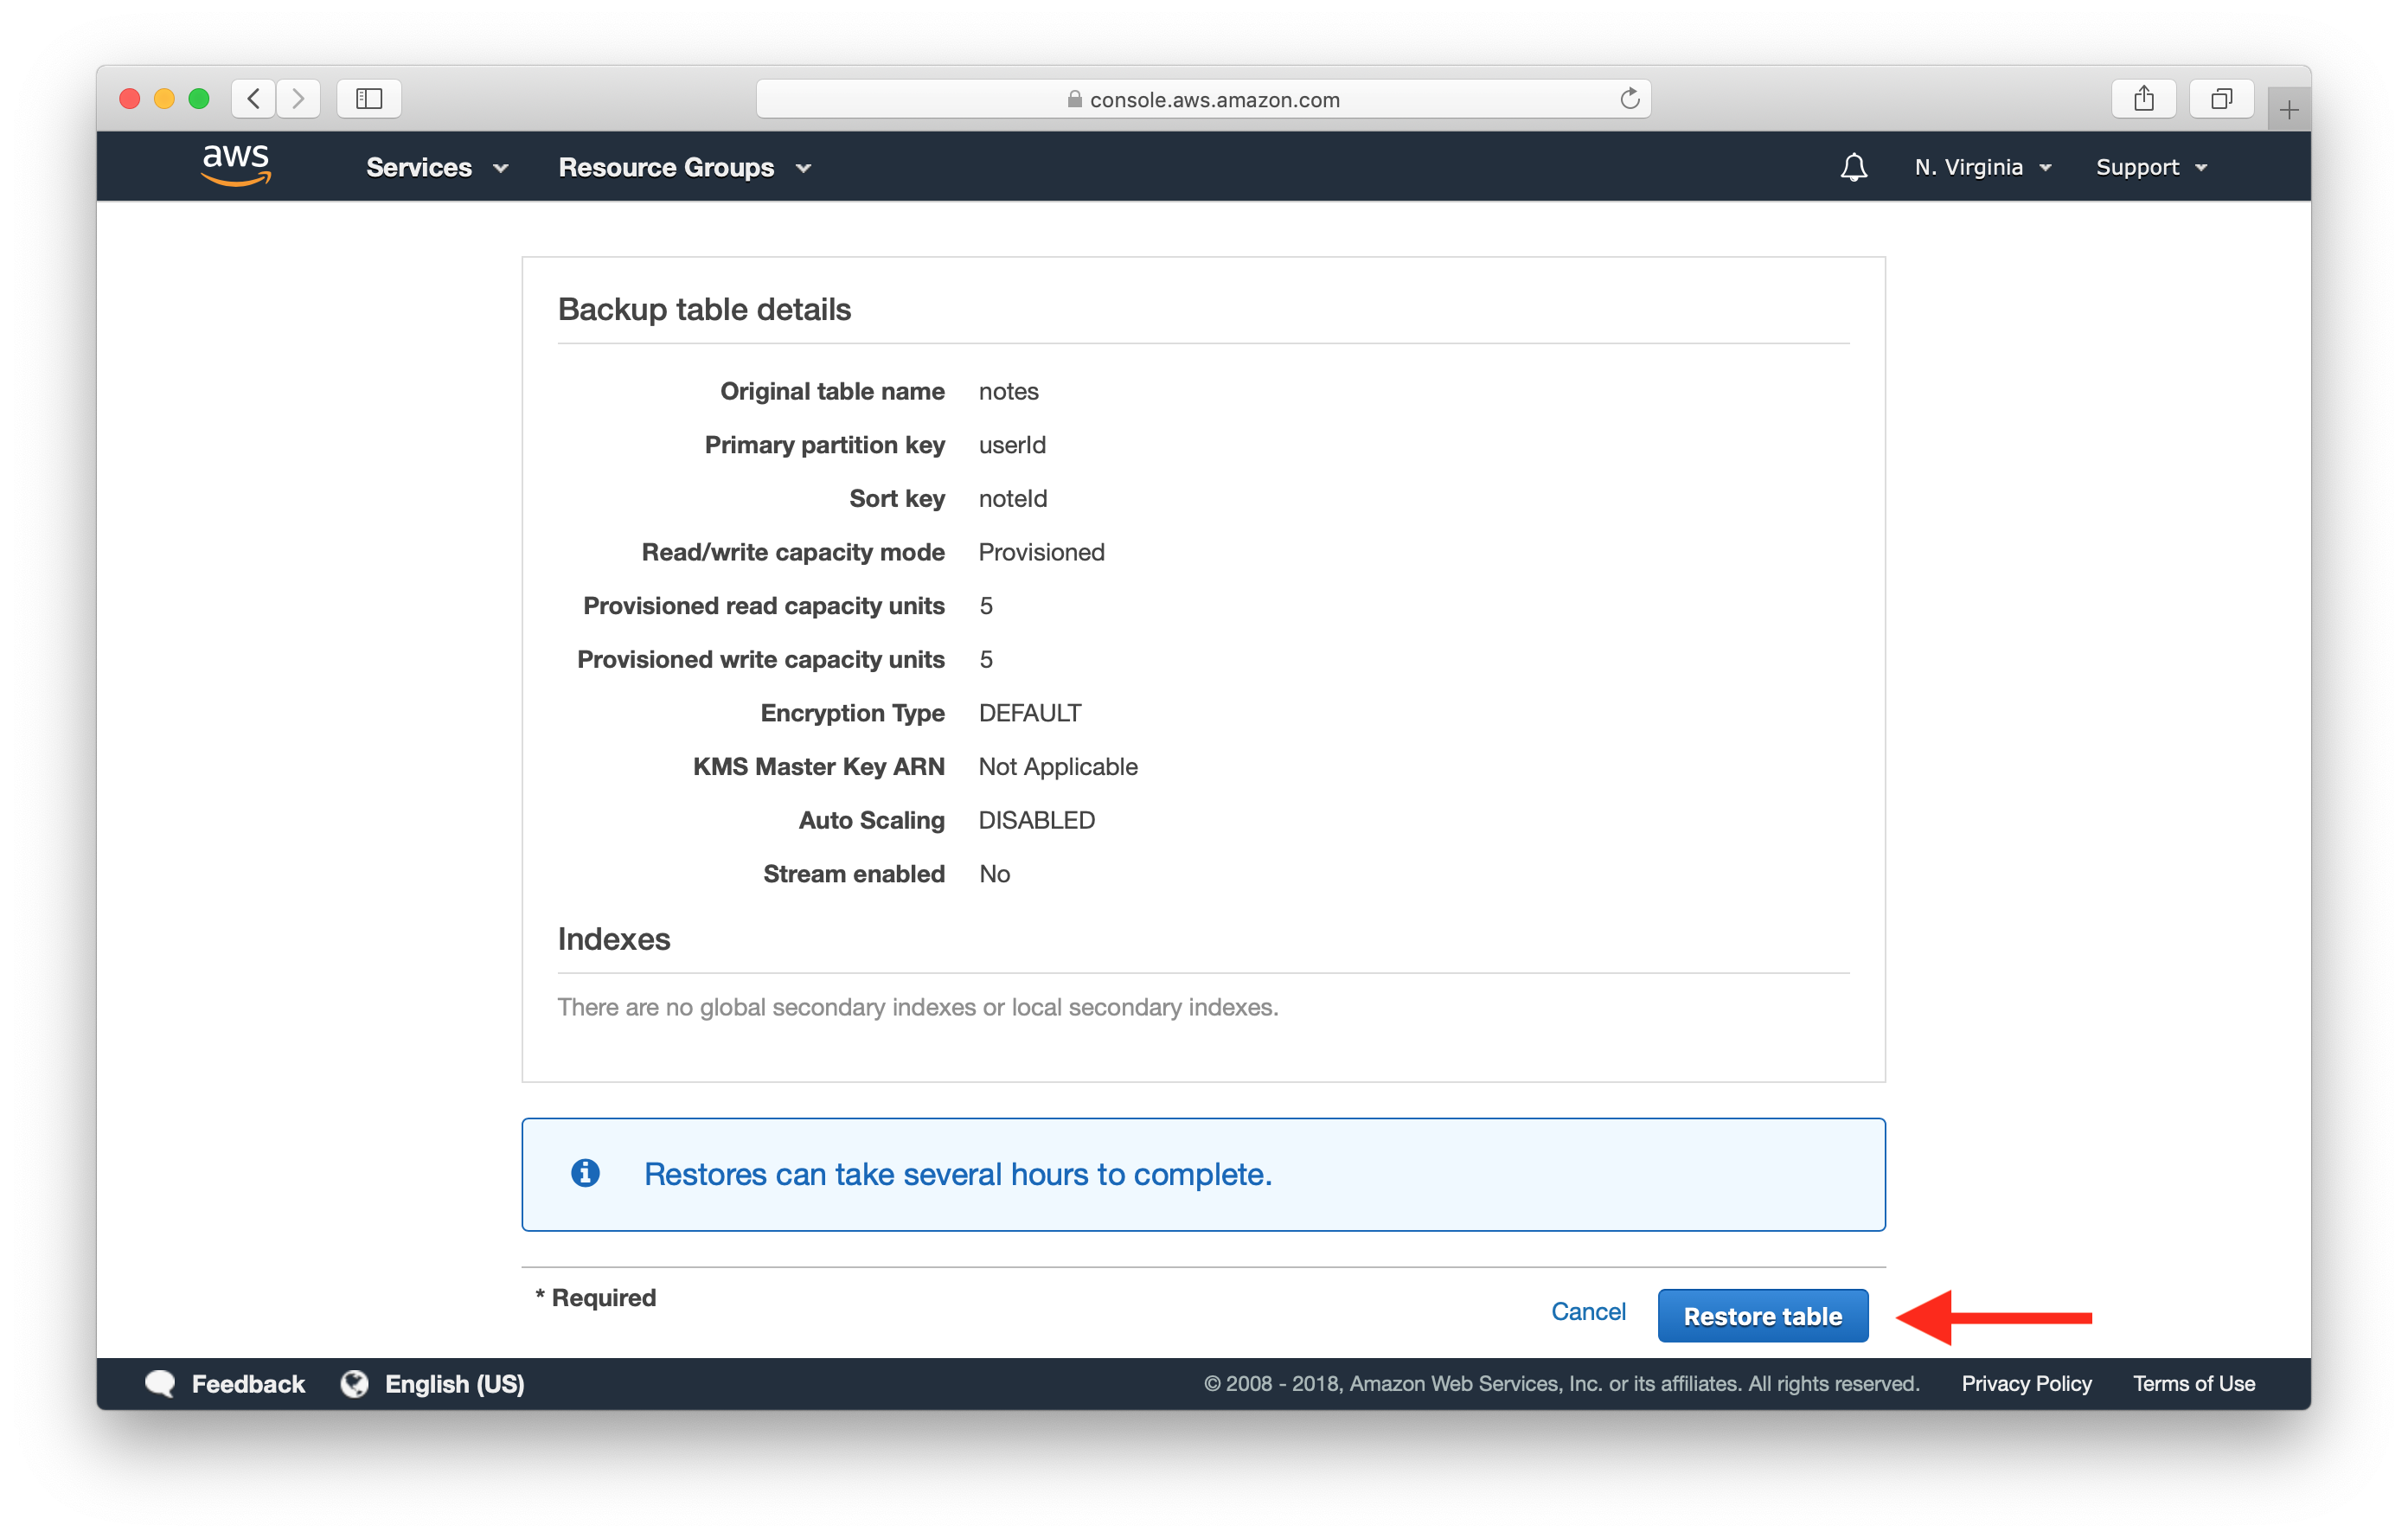 Select Restore DynamoDB table to Point-in-time screenshot